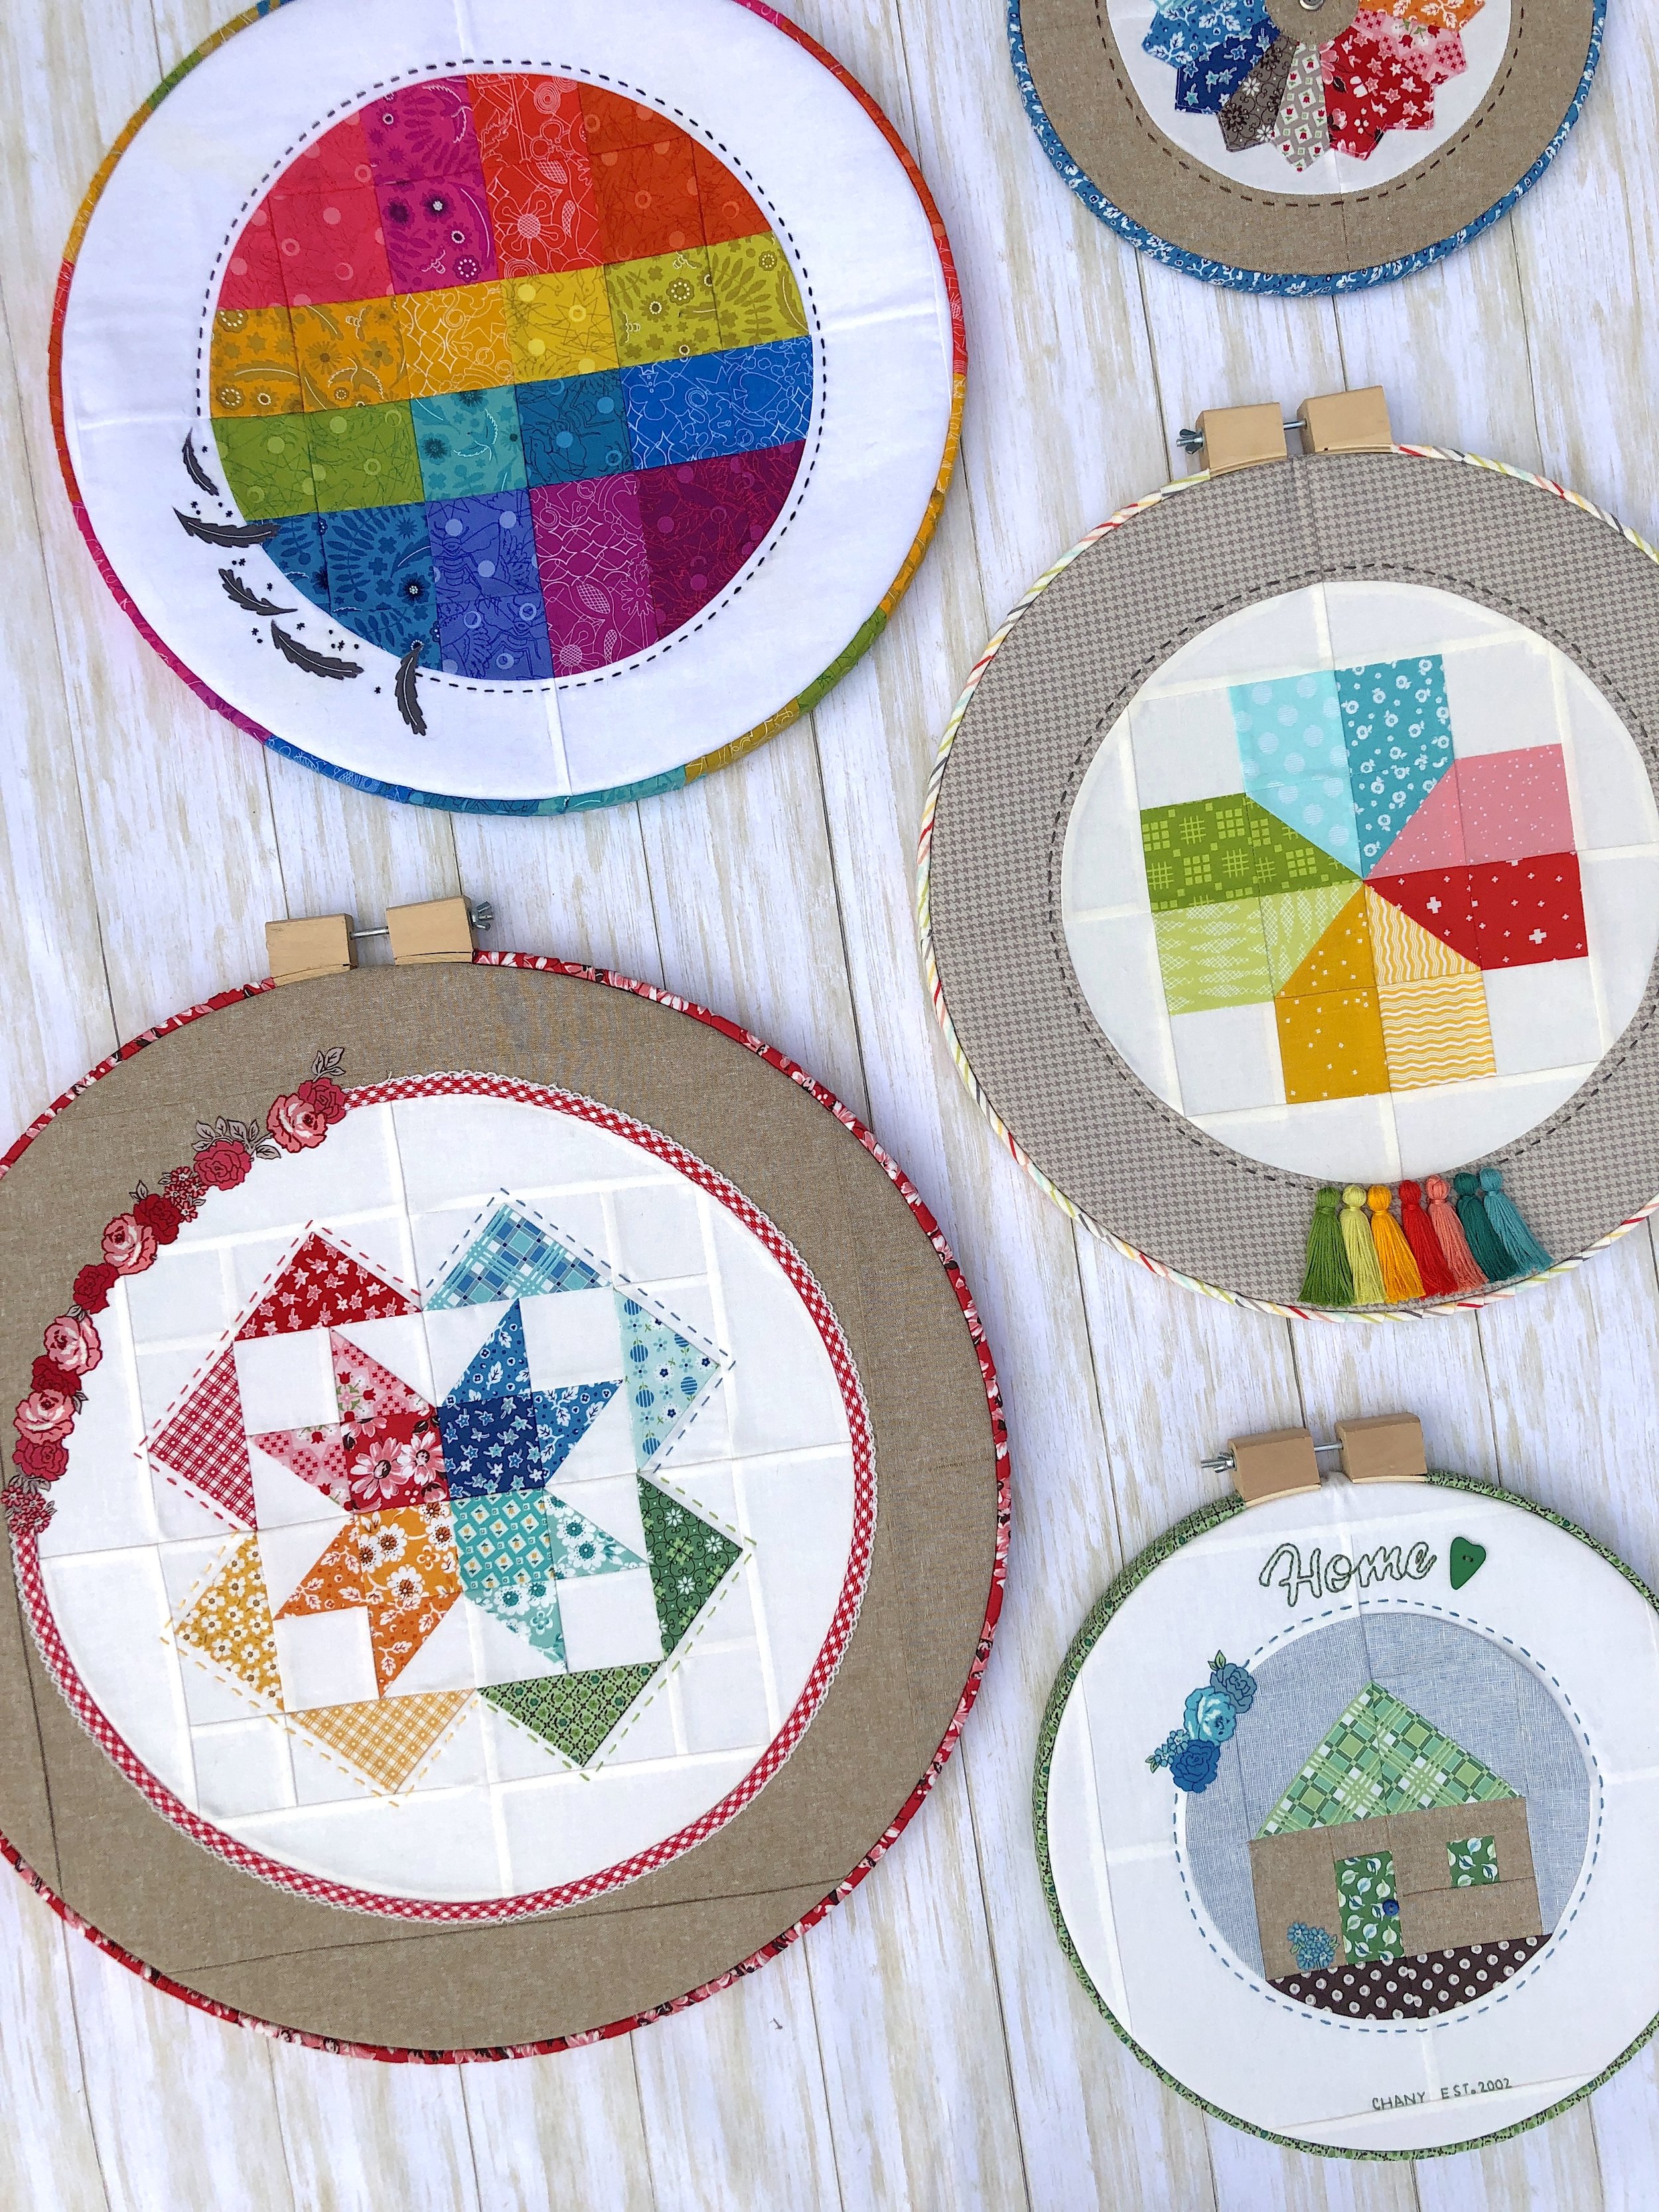 Hoop Quilts for Beginners: What are Hoop Quilts? — AnneMarie Chany